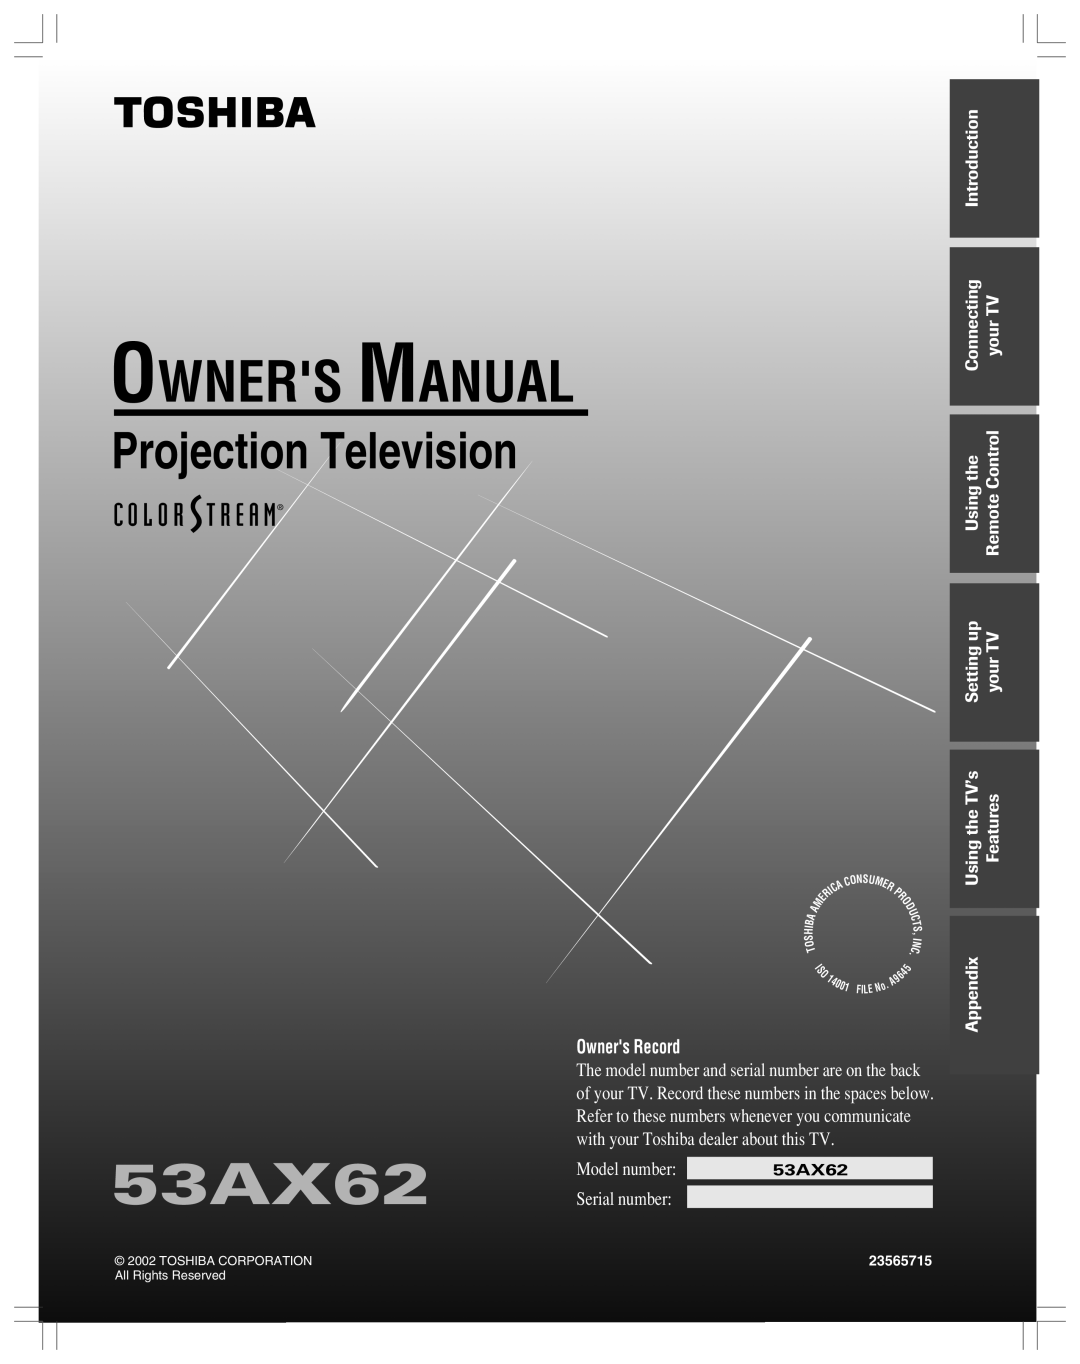 Toshiba 53AX62 owner manual Introduction, Connecting, yourTV, RemoteControl, Settingup, UsingtheTV’s, Features 